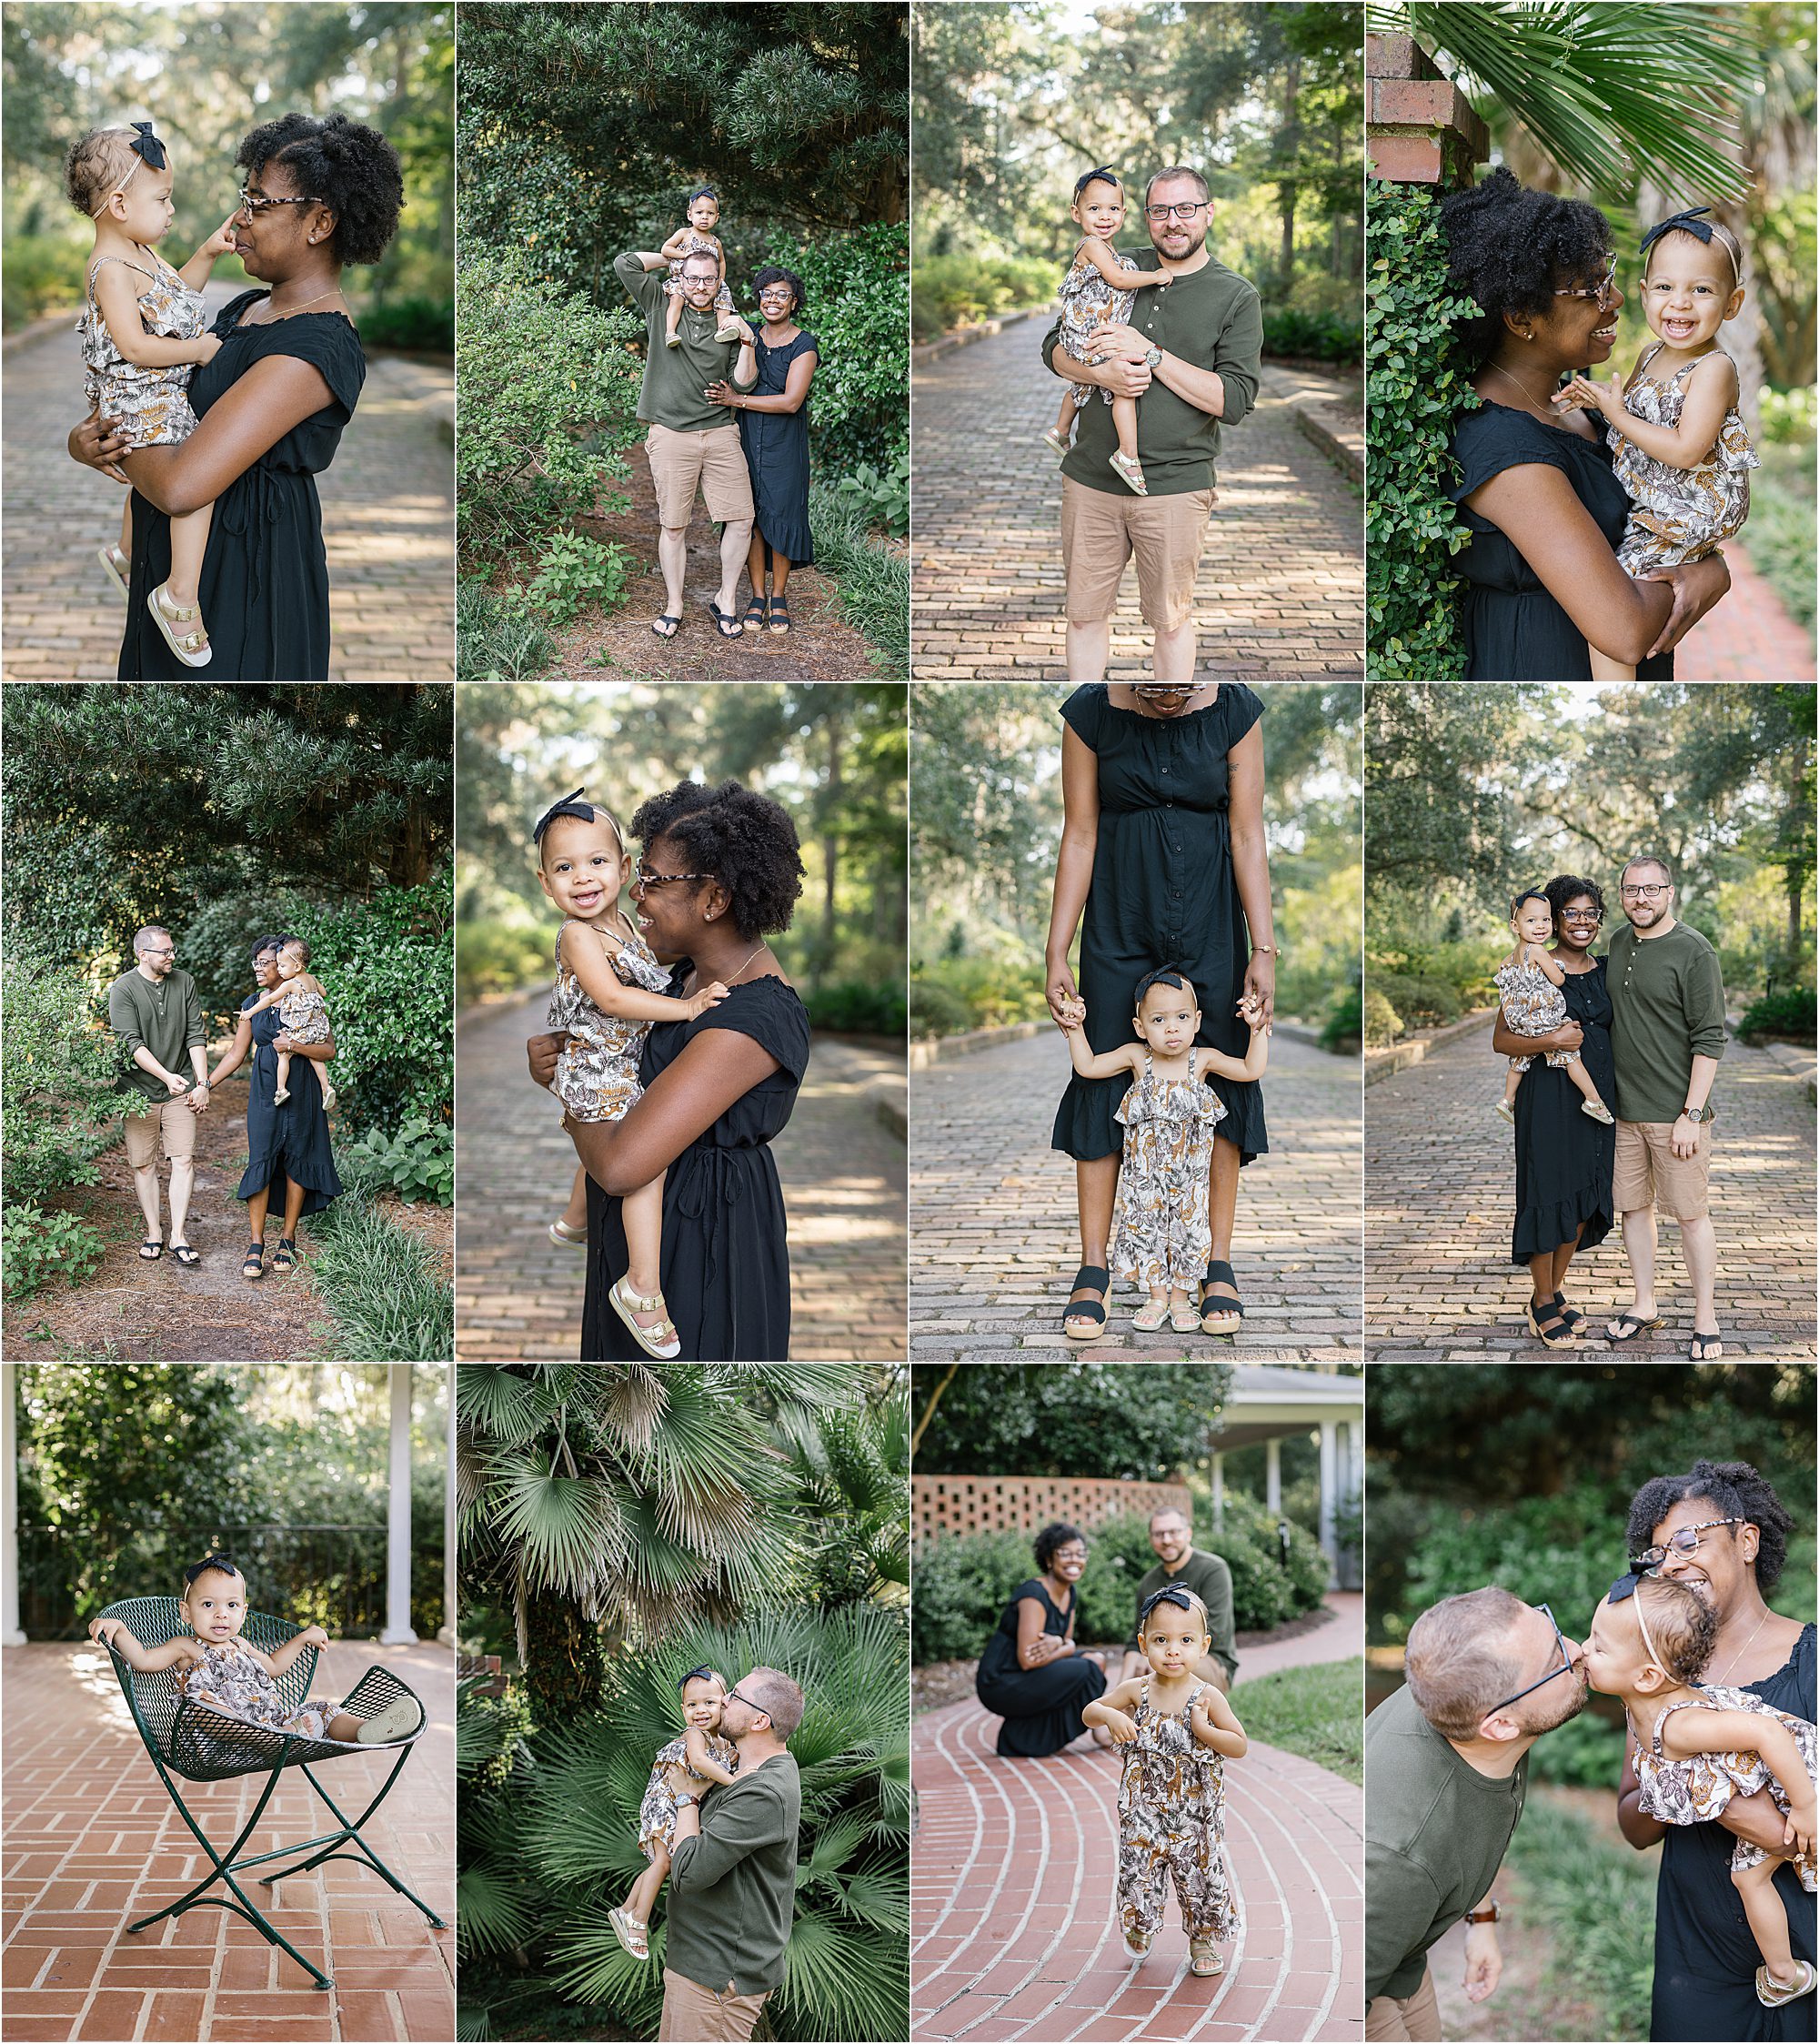 18 month baby plan photography session at Maclay Gardens State Park - Sarah Gray Photography, Tallahassee, Florida